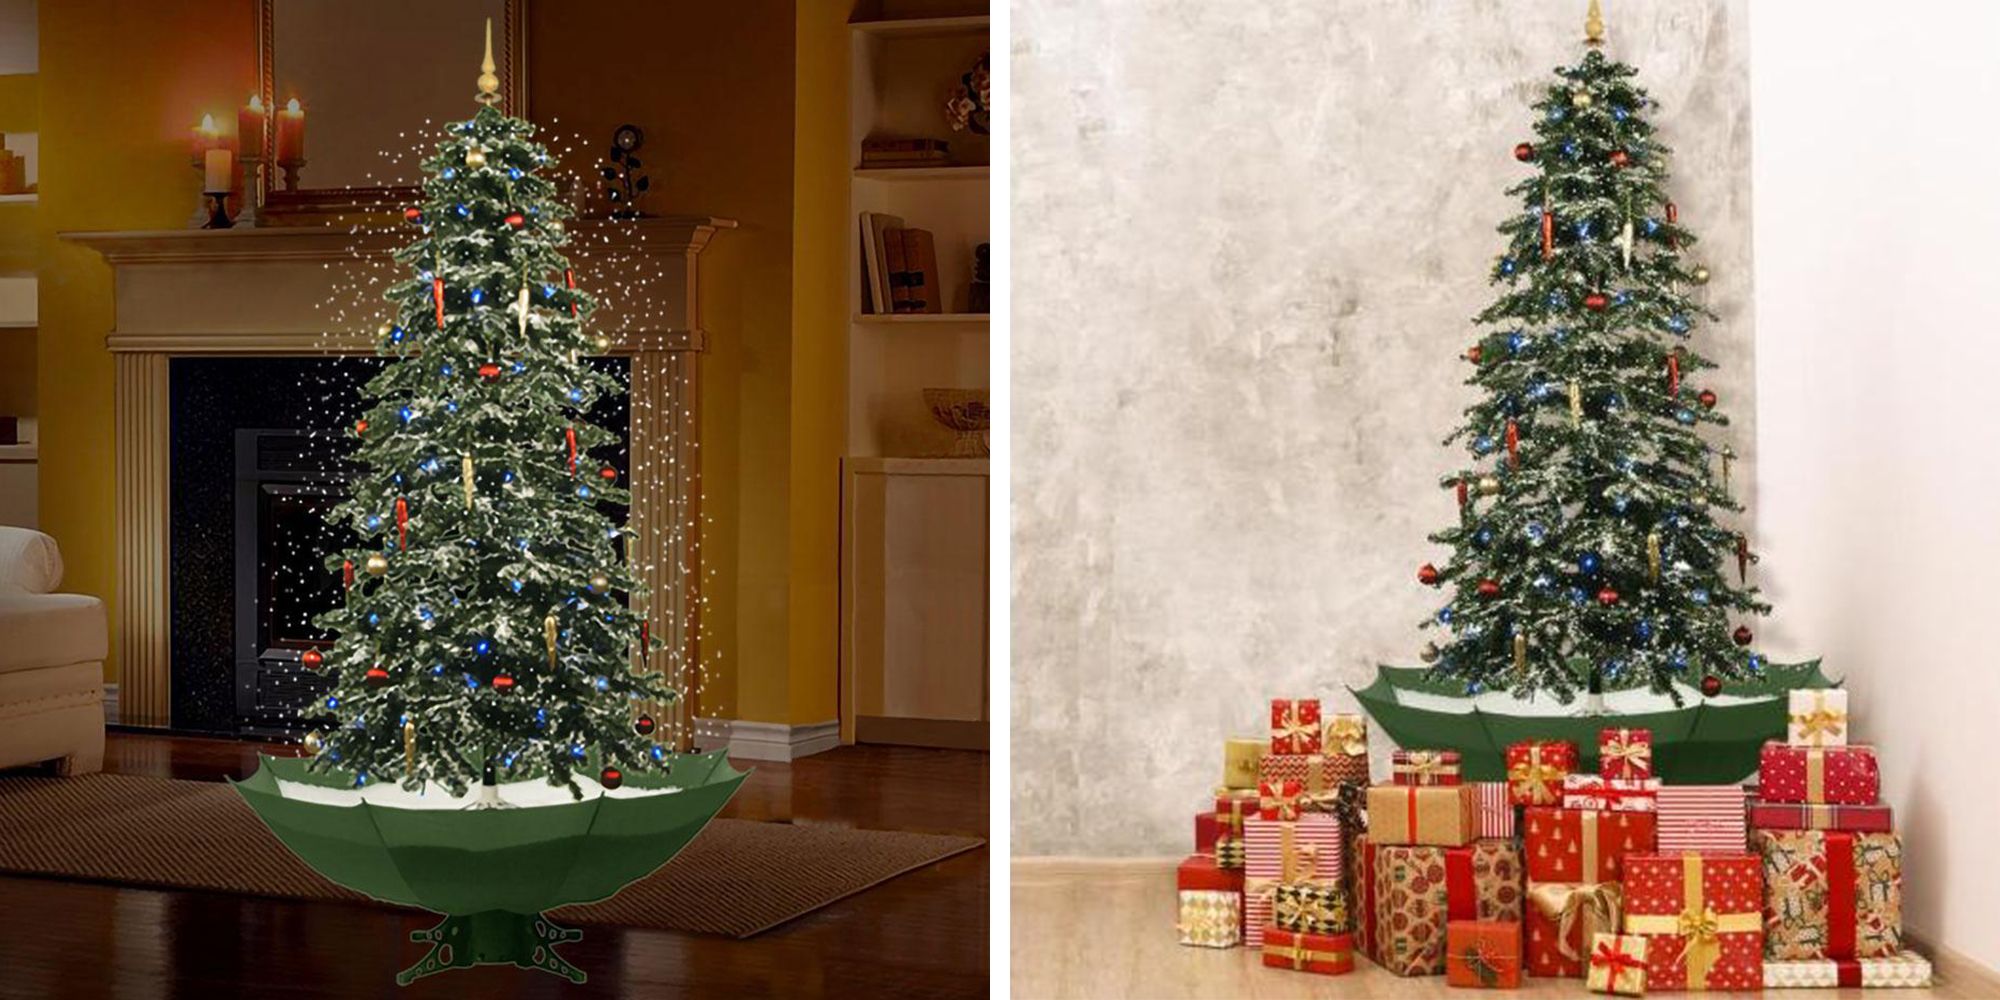 Home Depot Is Selling a Christmas Tree That Literally Snows and ...